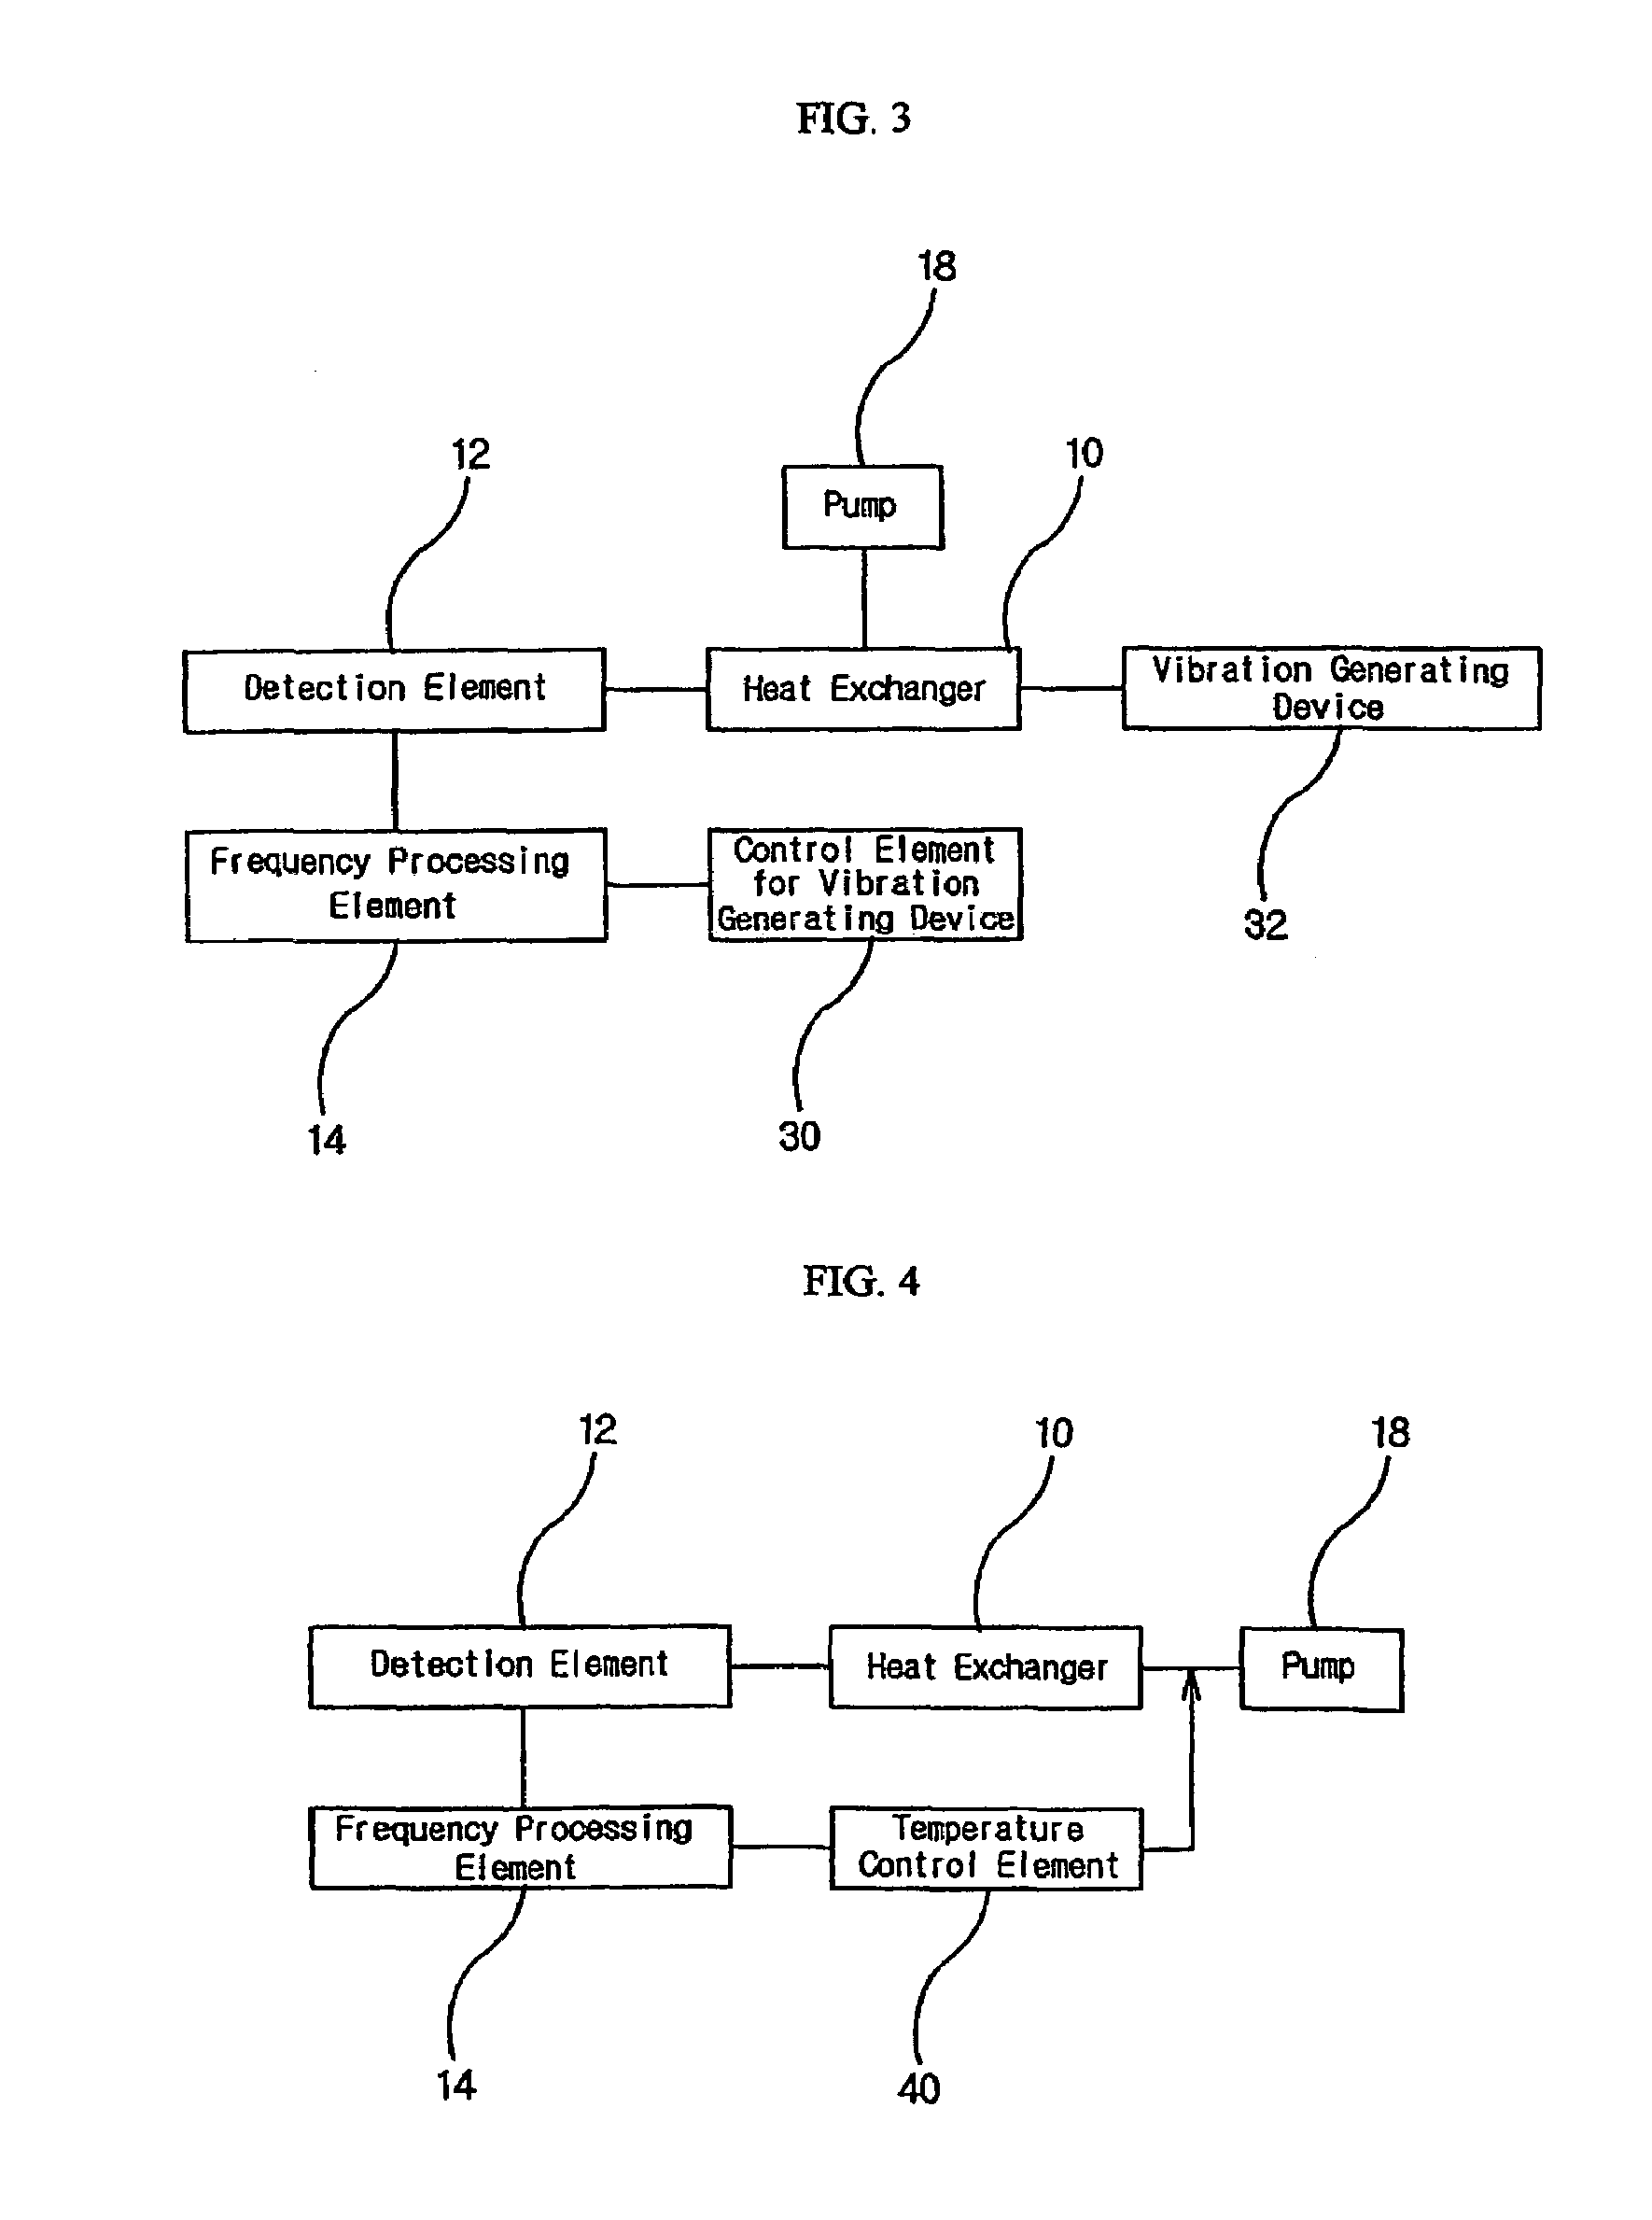 Feed-back control system for heat exchanger with natural shedding frequency